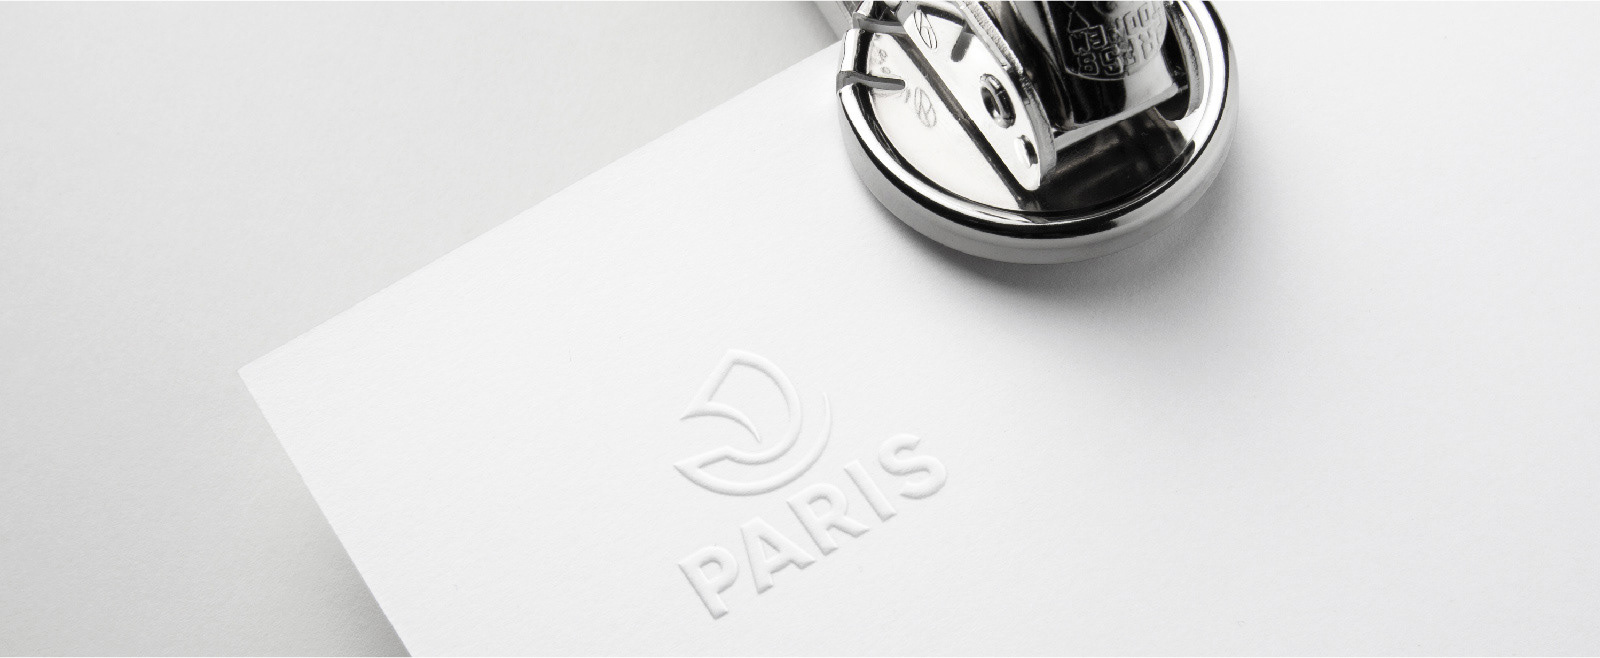 New Logo and Identity for City of Paris by Carré Noir